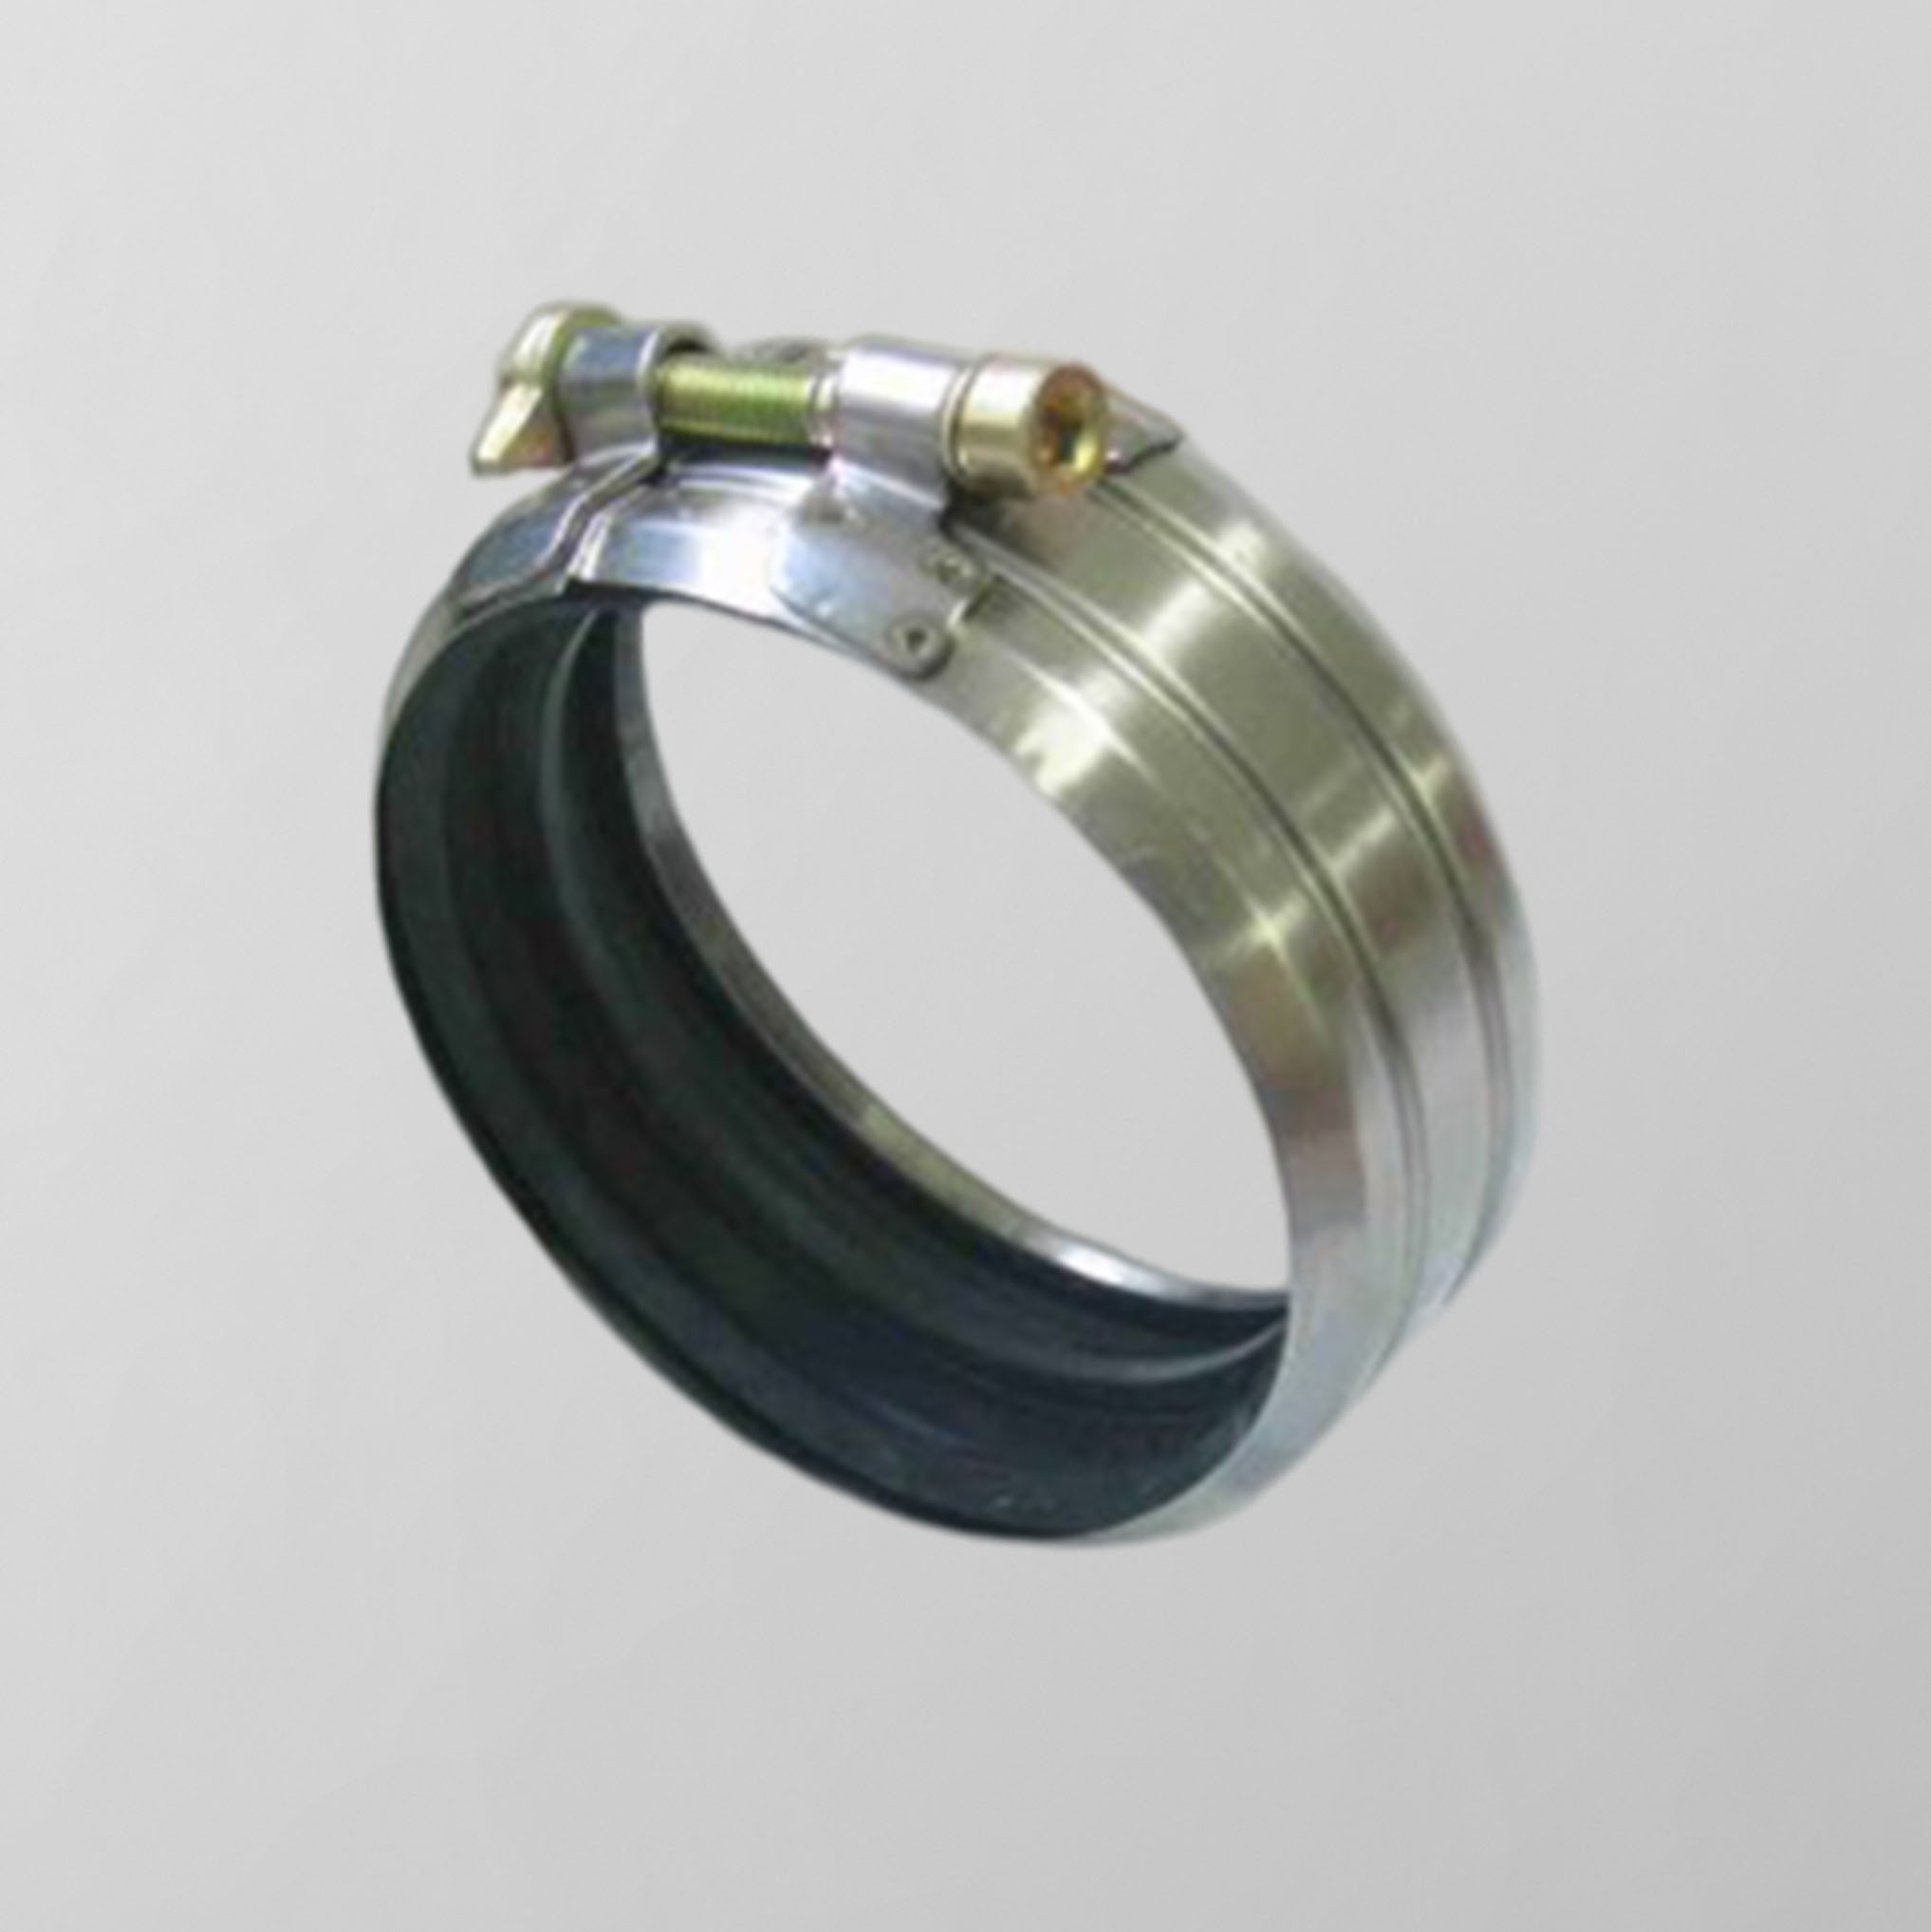 Chinese Professional Grip Collar - RAPID COUPLING JOINT & ACCESSARY – DINSEN detail pictures